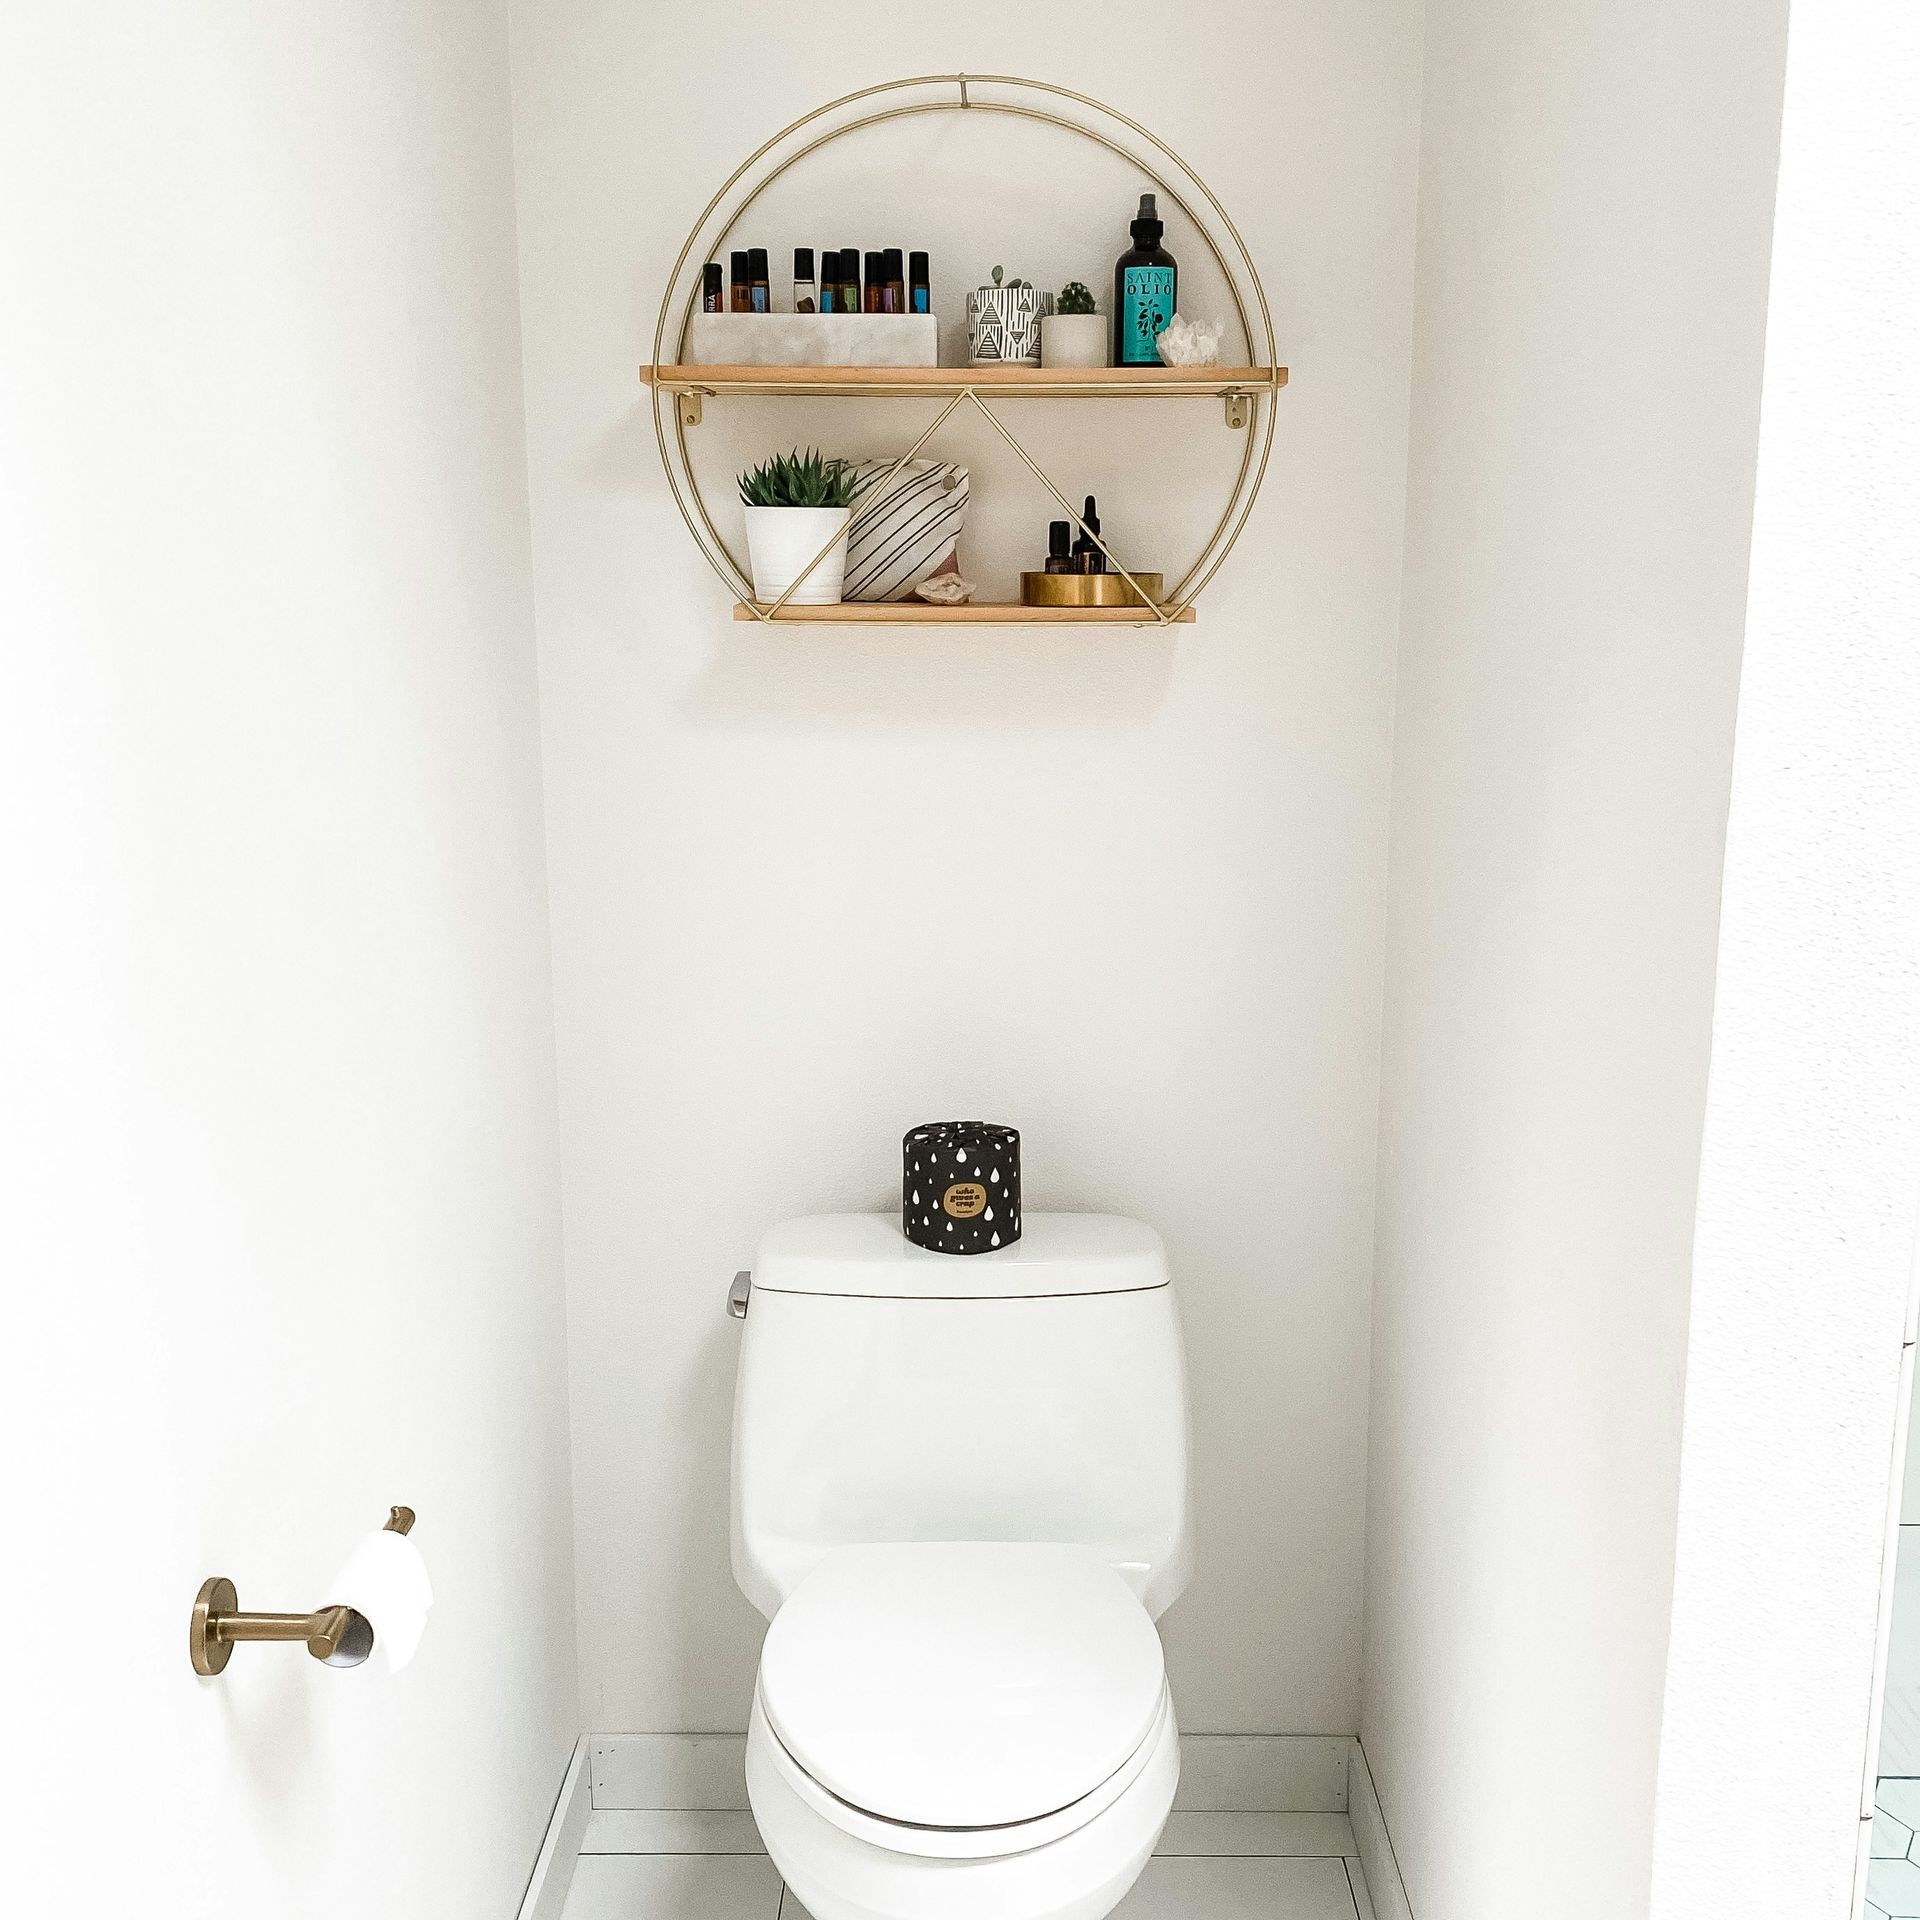 A bathroom with a toilet and a shelf above it.